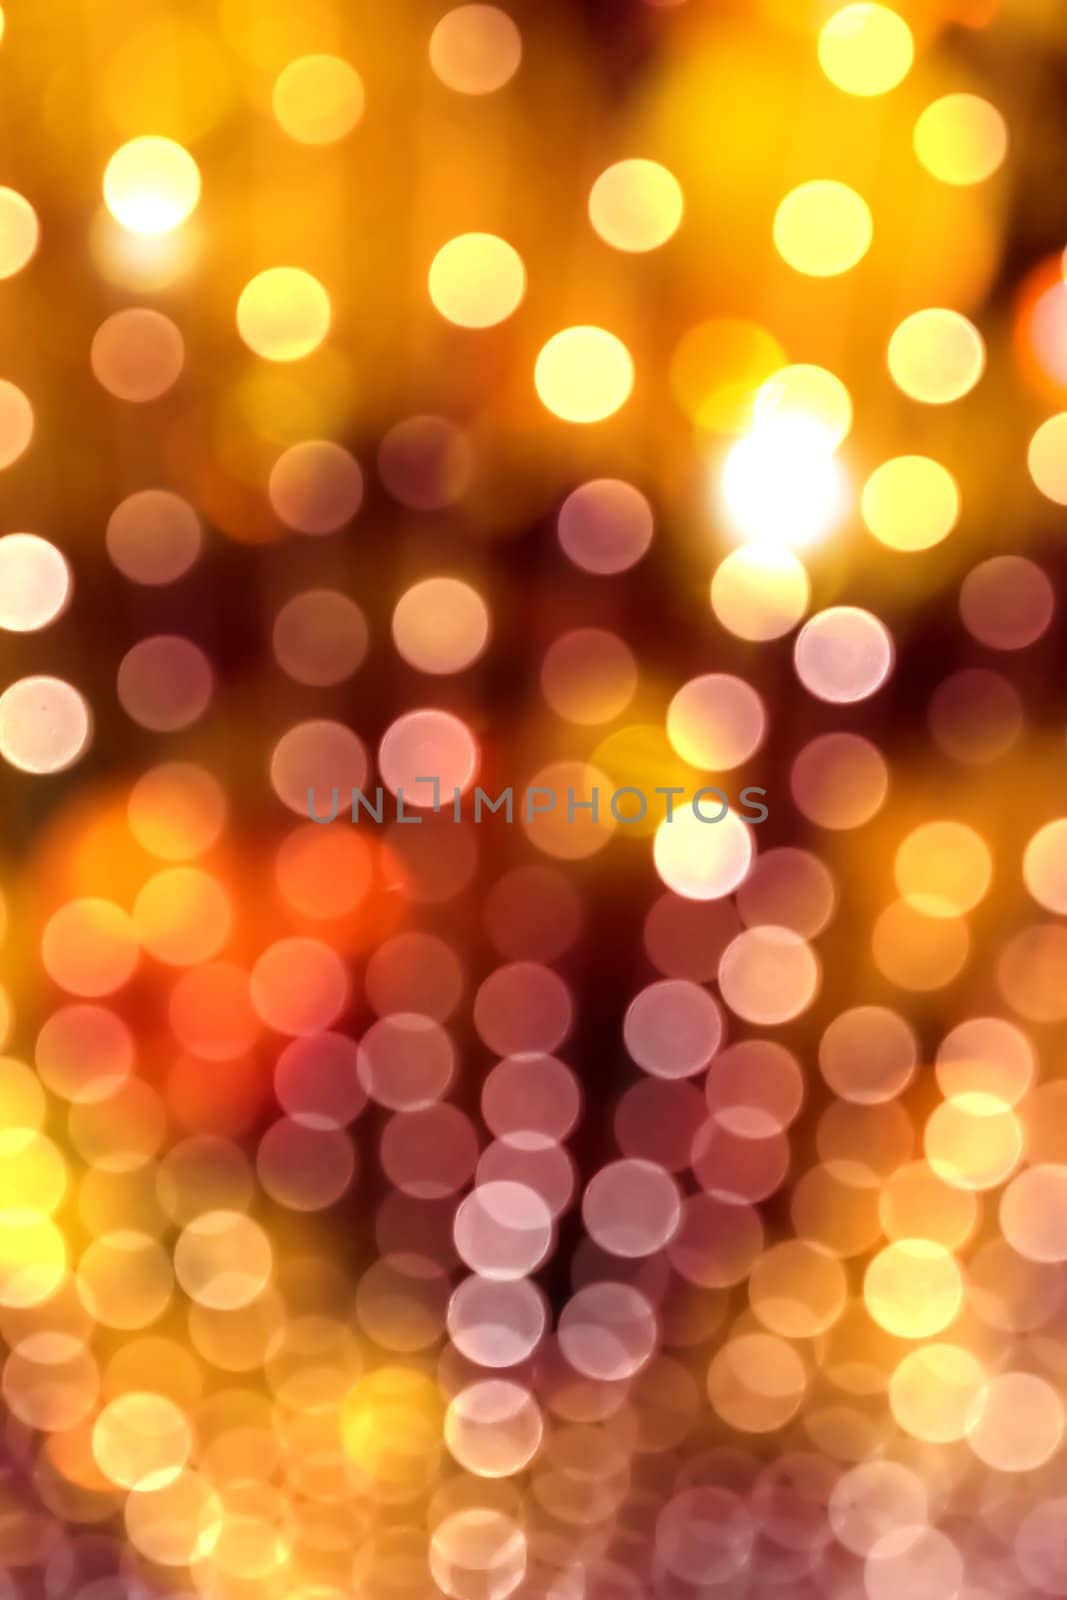 out of focus lights by chrisroll